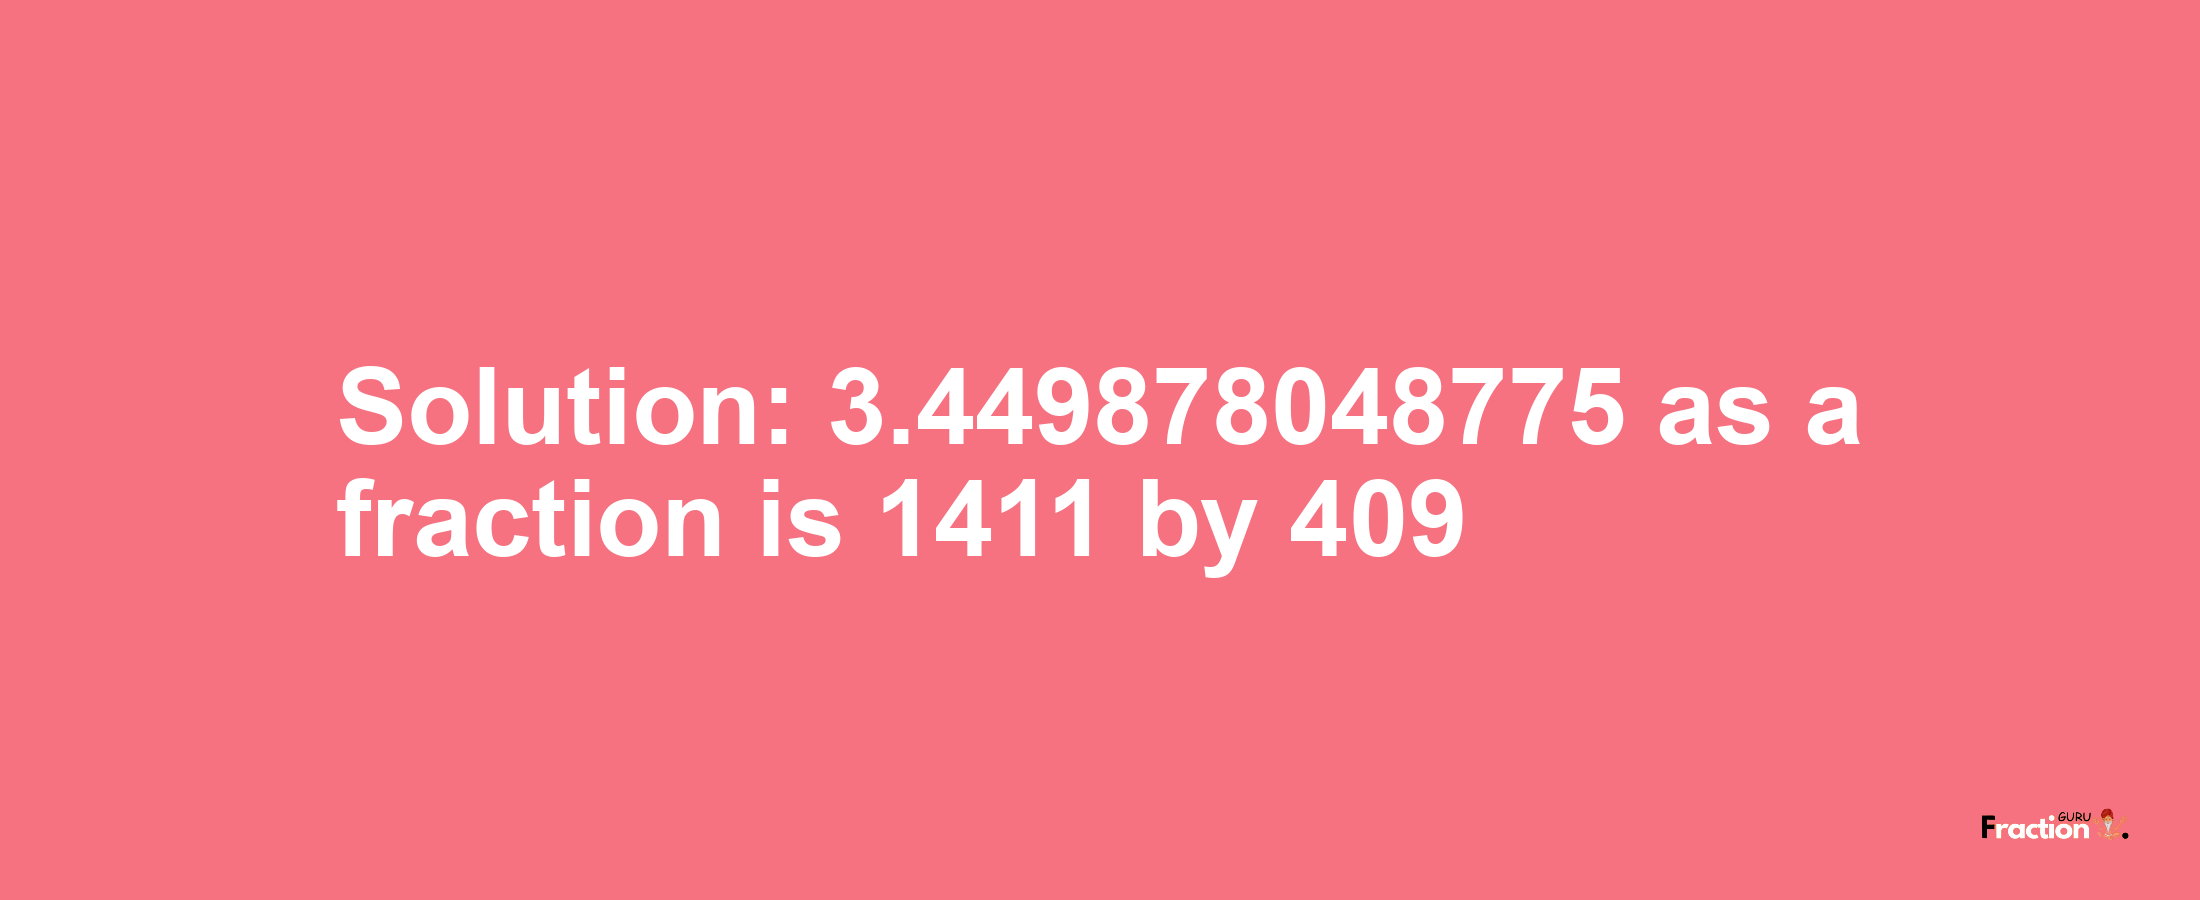 Solution:3.449878048775 as a fraction is 1411/409